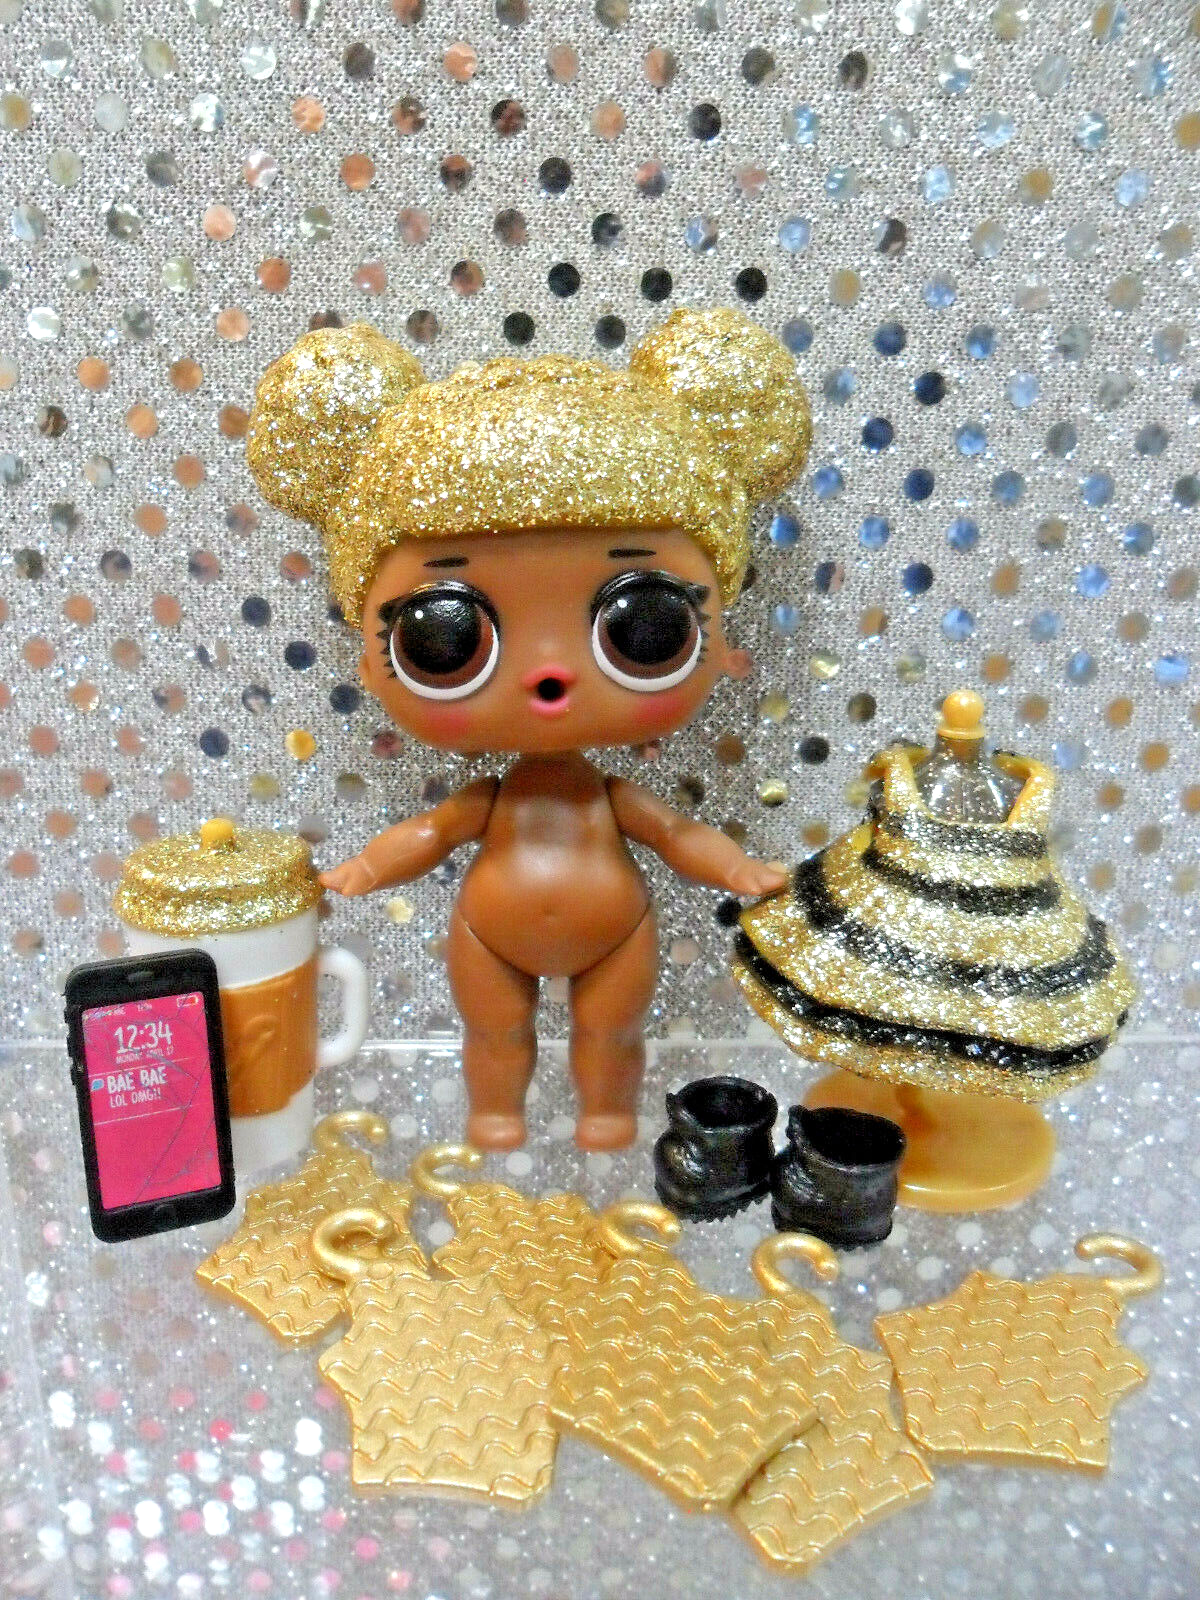 NEW LOL SURPRISE "QUEEN BEE DOLL & ACCESSORIES "SEALED PACKS" FROM BOX BOUTIQUE L.O.L. Surprise!